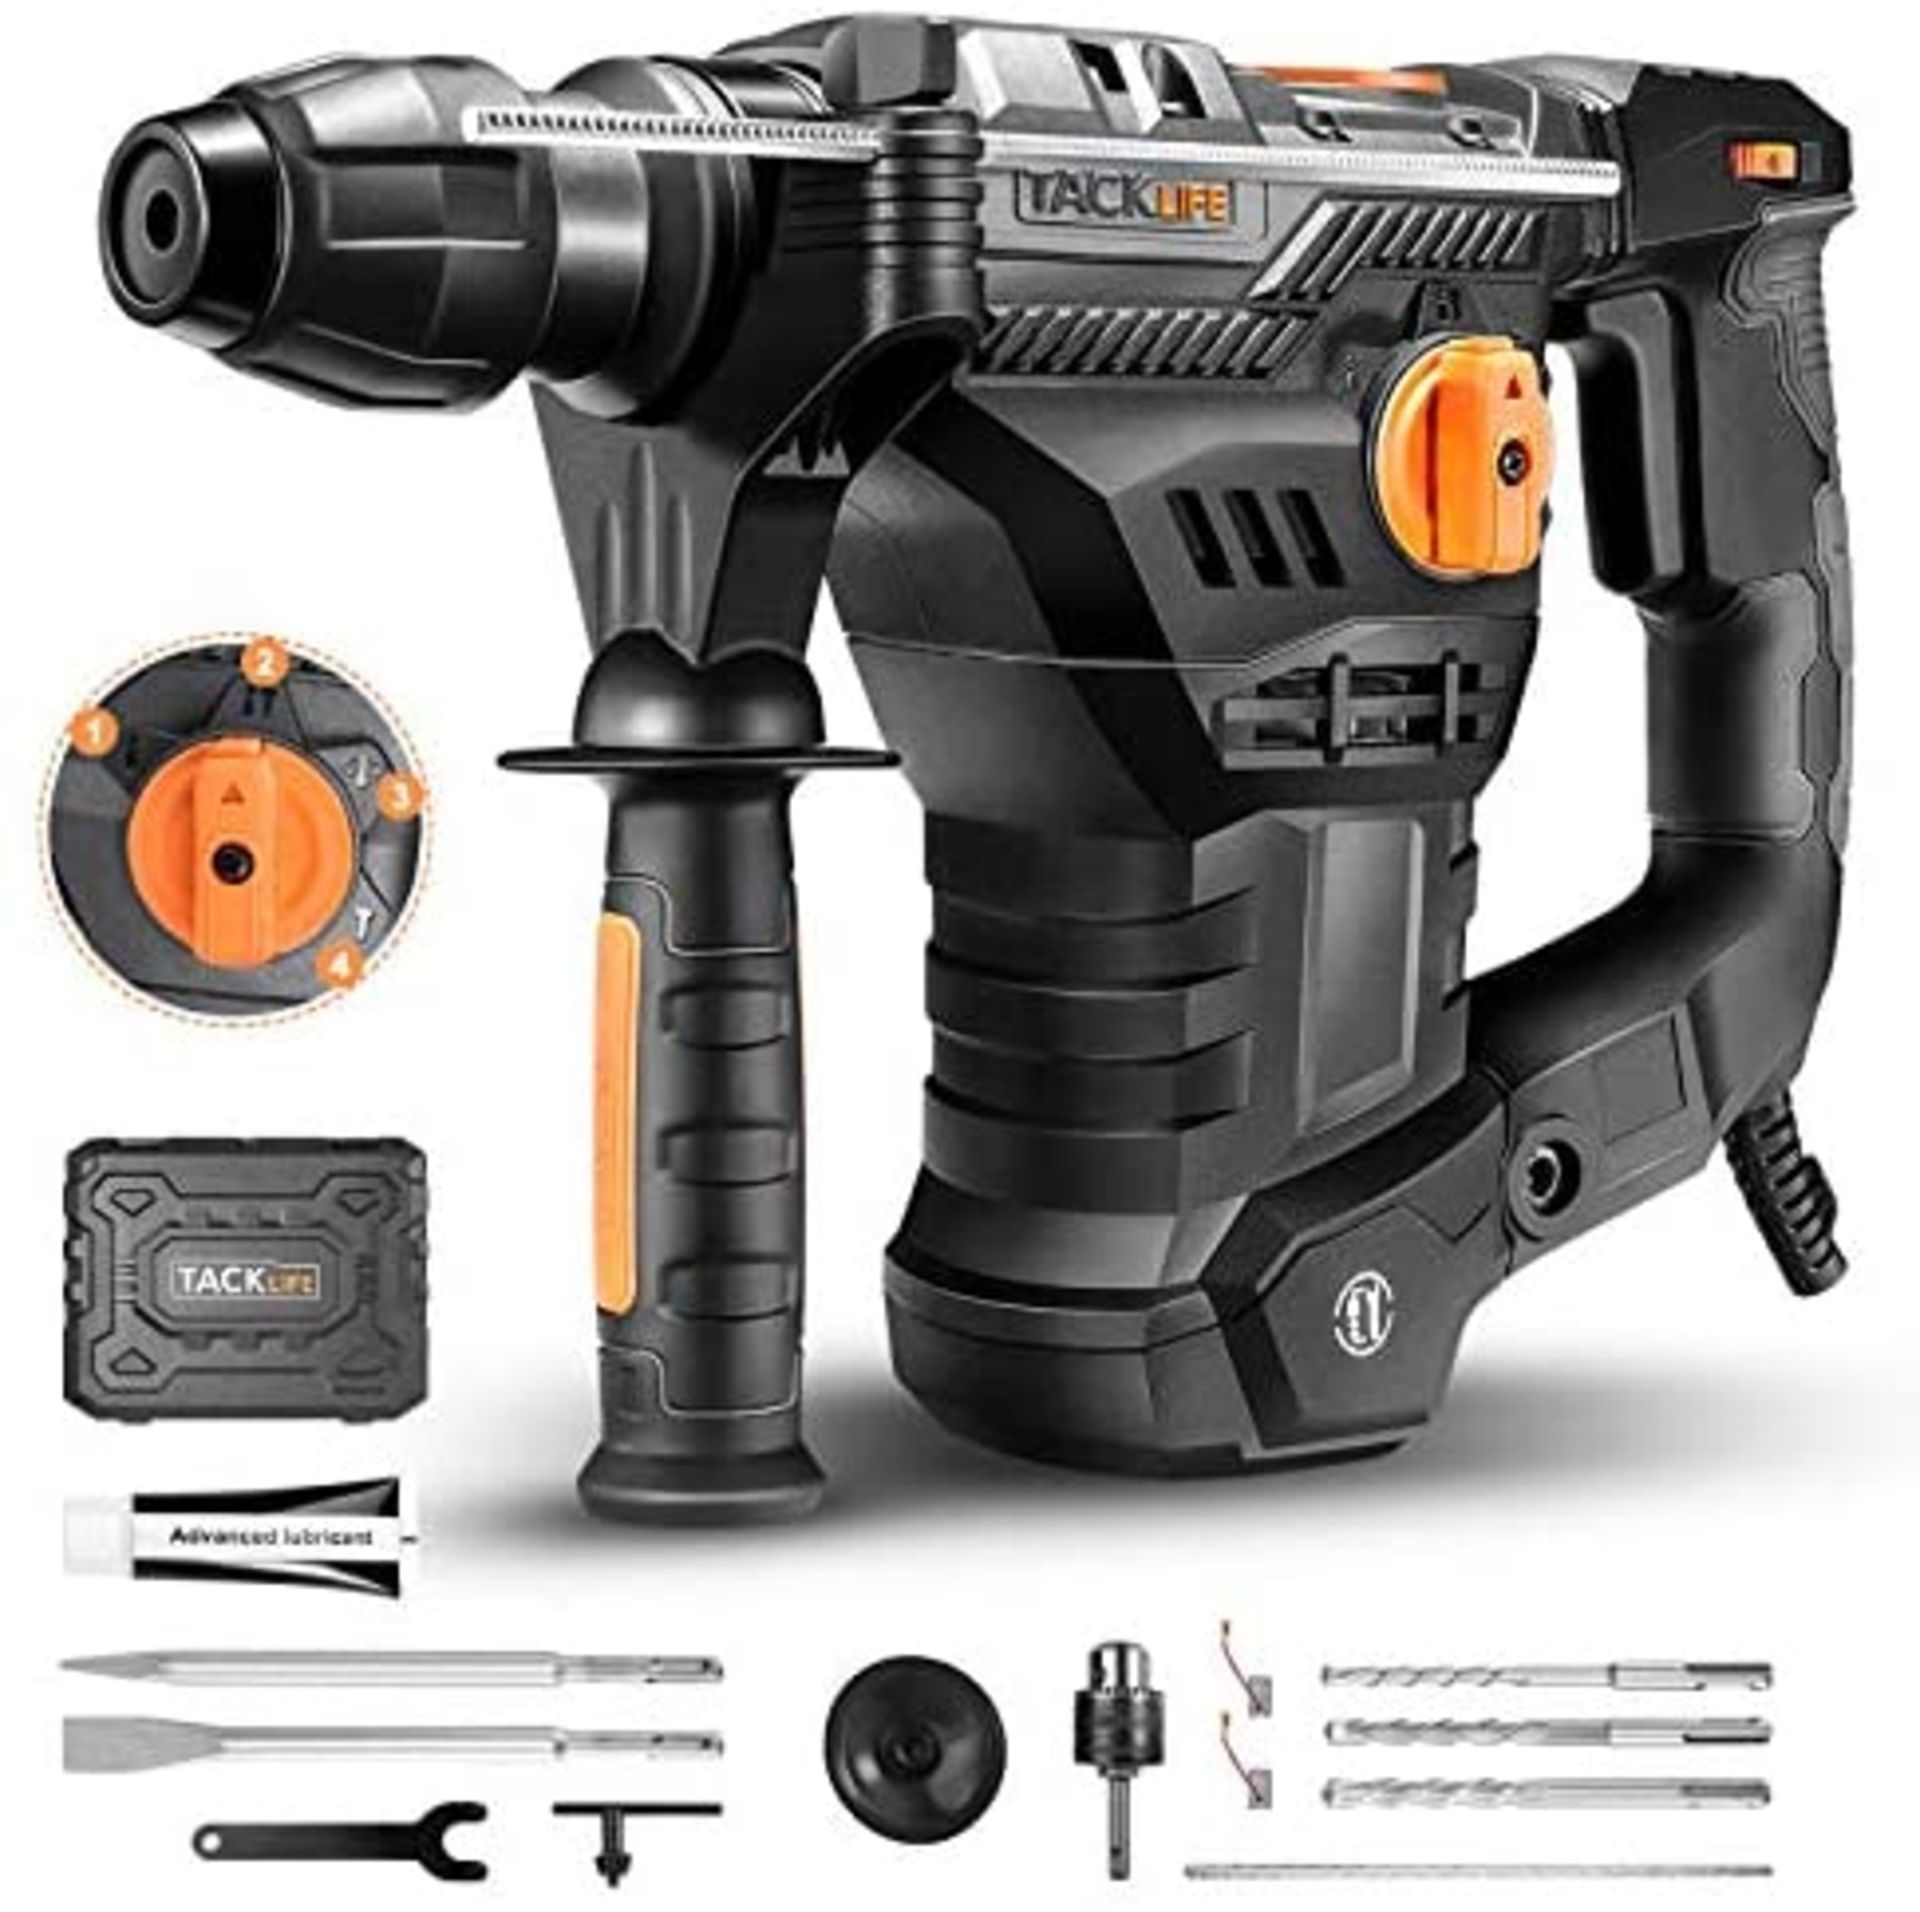 10 X NEW BOXED Hammer Drill, Rotary Hammer Drill 1500W 7J with SDS Plus Chuck and Vibration Control,